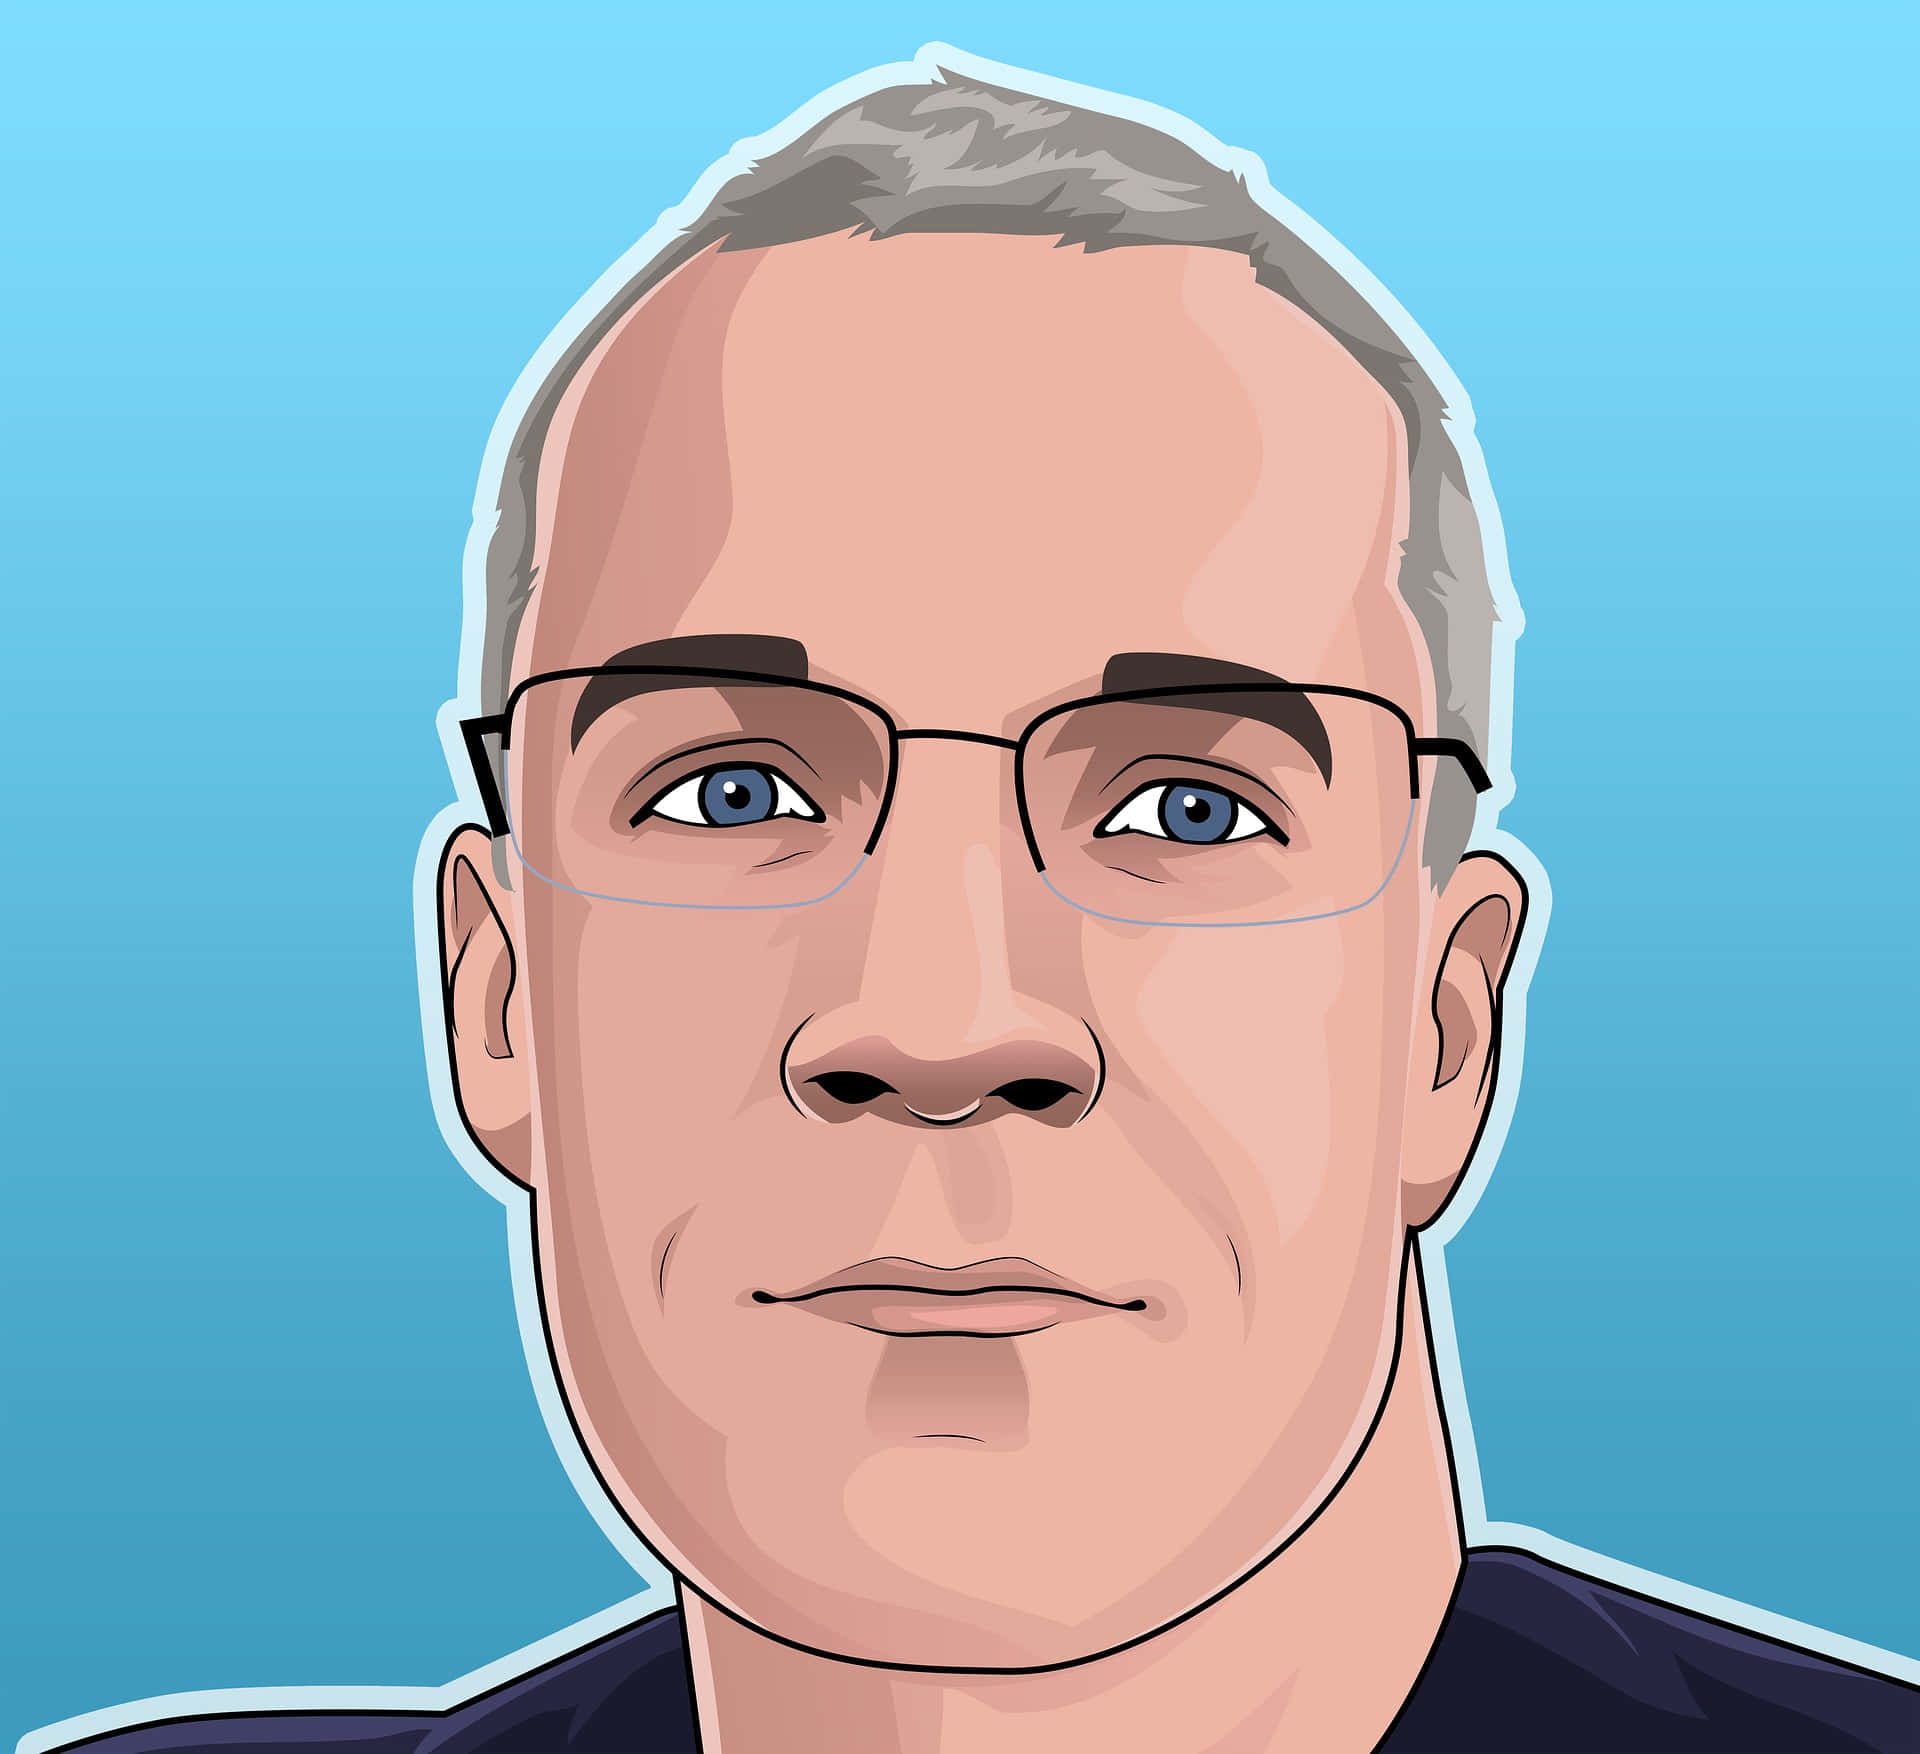 Man With Glasses Cartoon Profile Picture